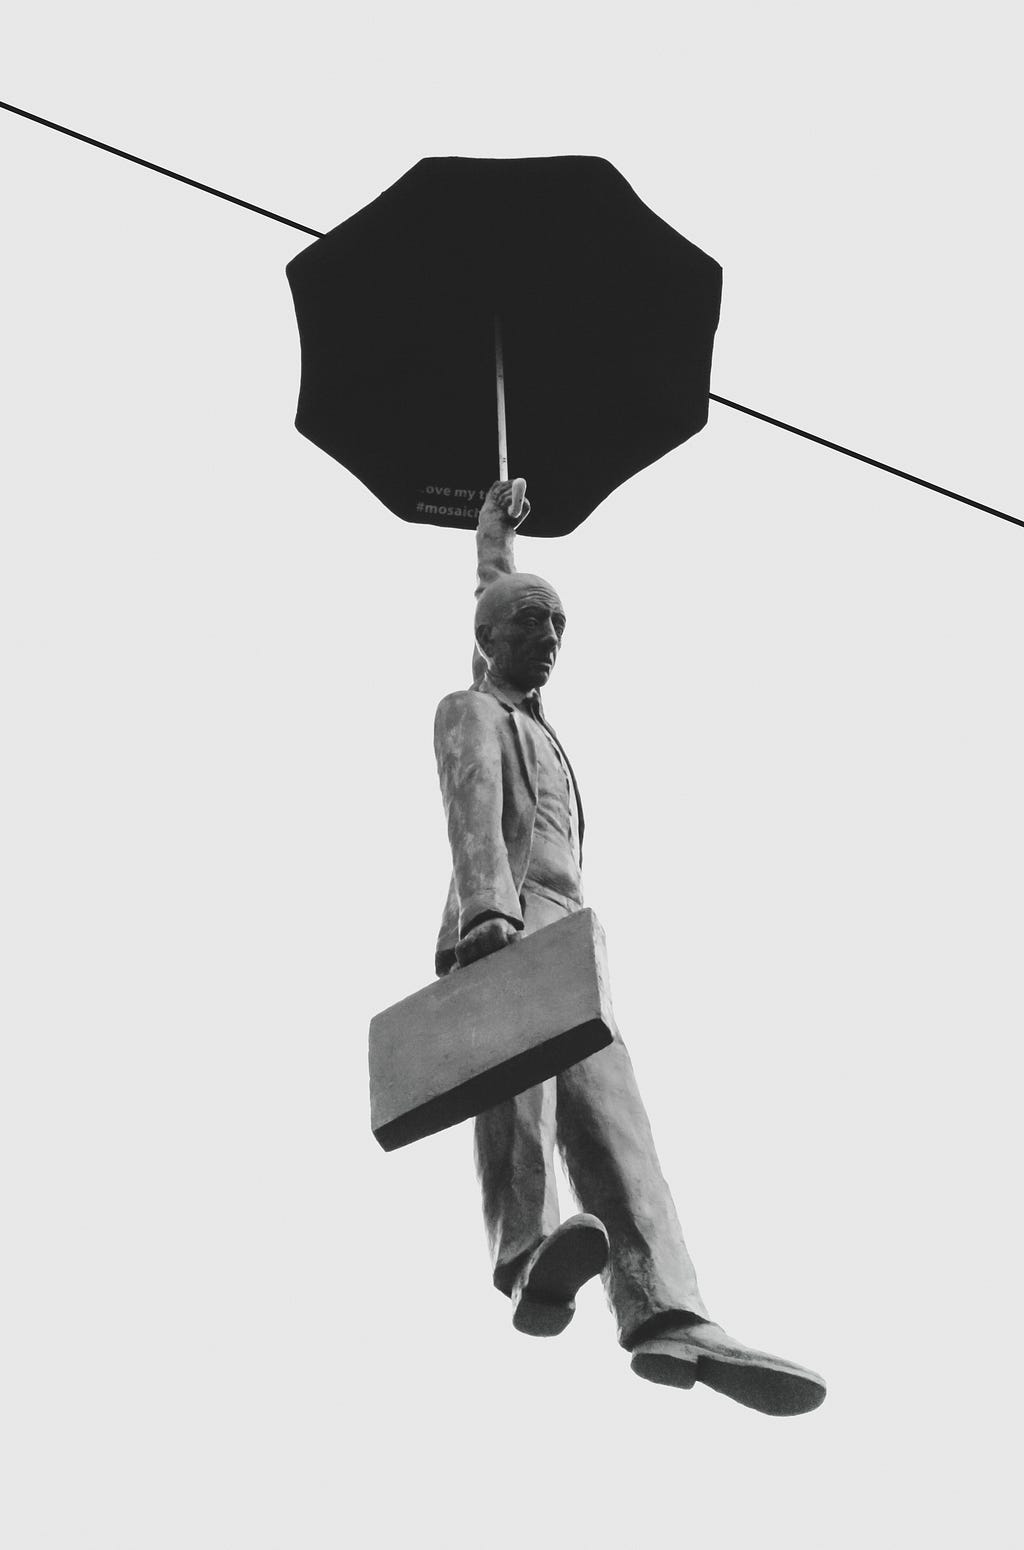 Bleak sculpture of office worker carrying a briefcase and open umbrella